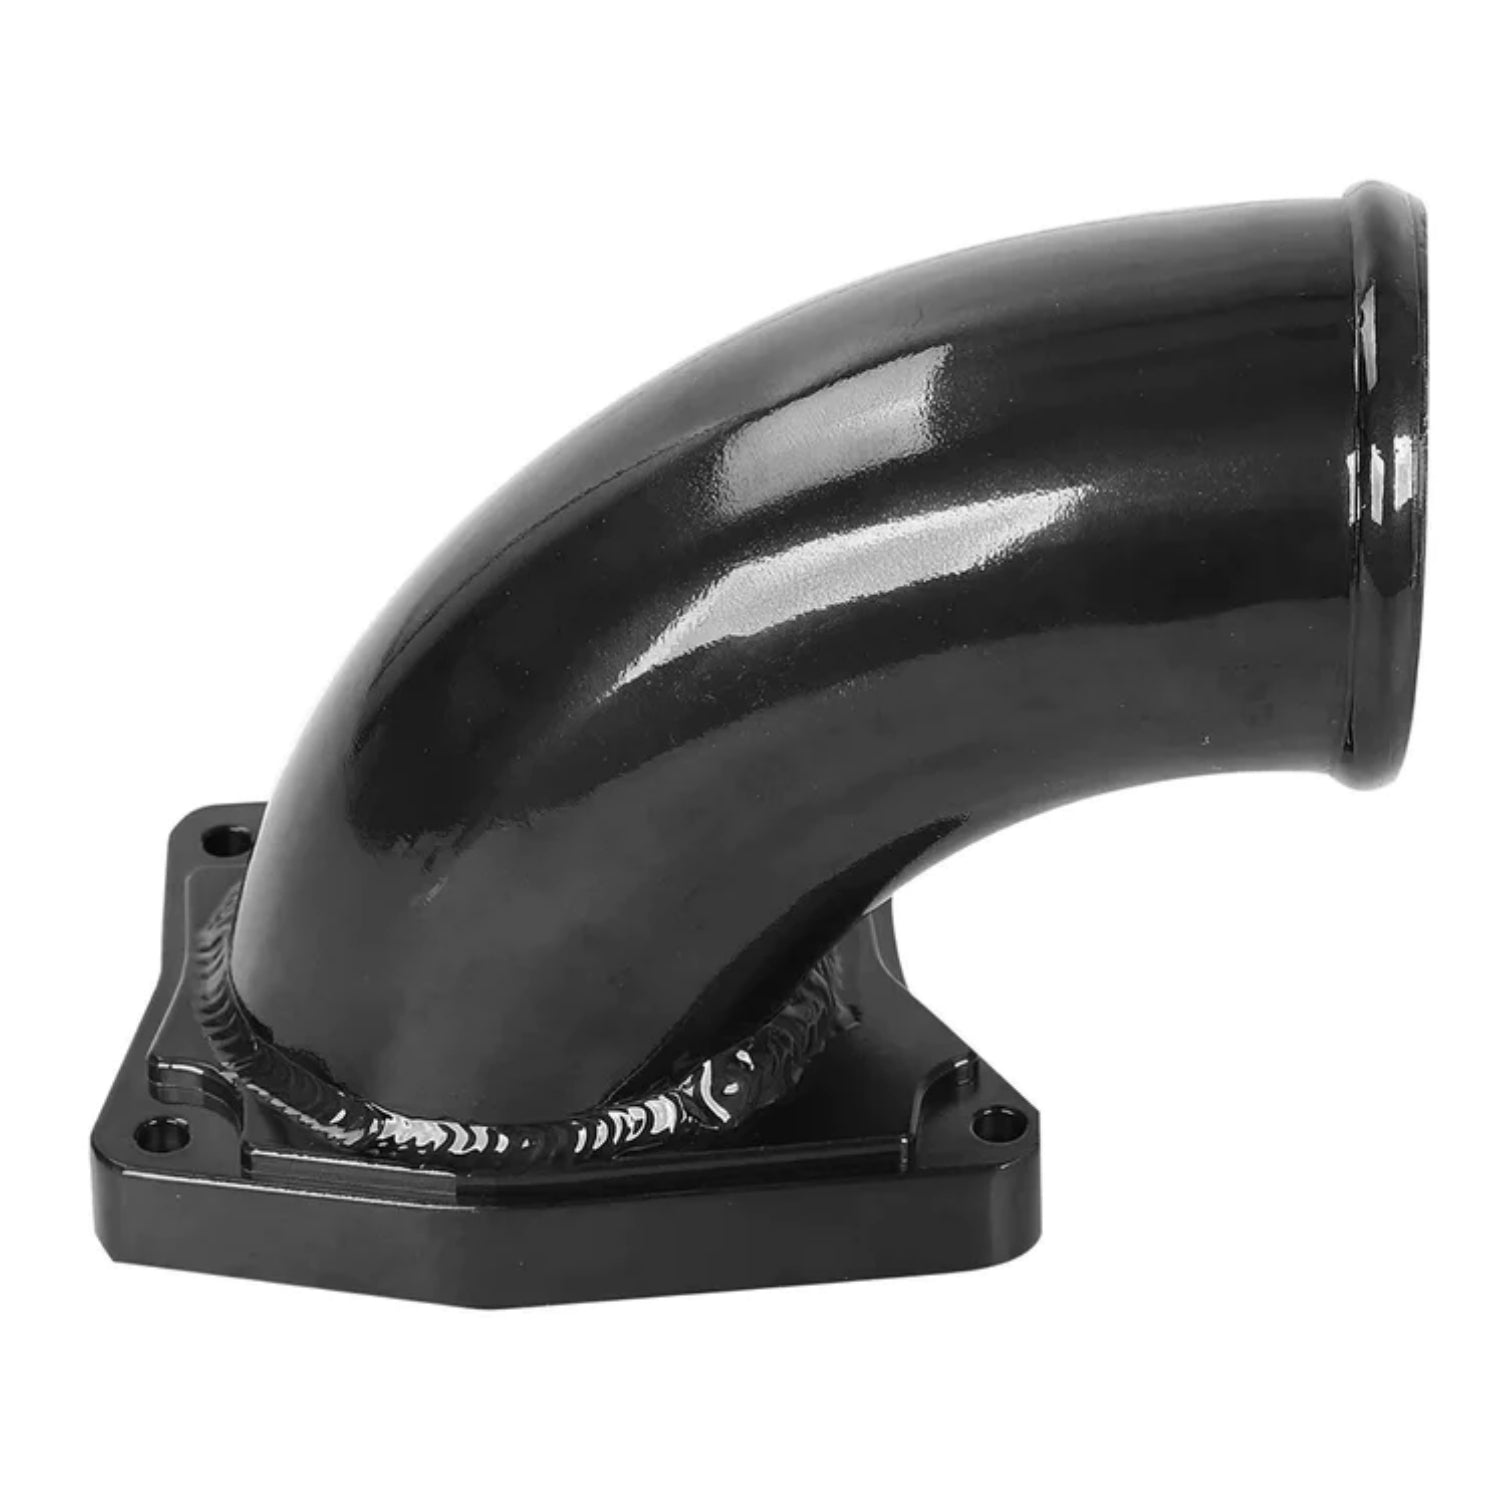 EGR Intake Pipe Intake Elbow for 2003-2007 6.0L Ford F250 F350 6.0L Powerstroke